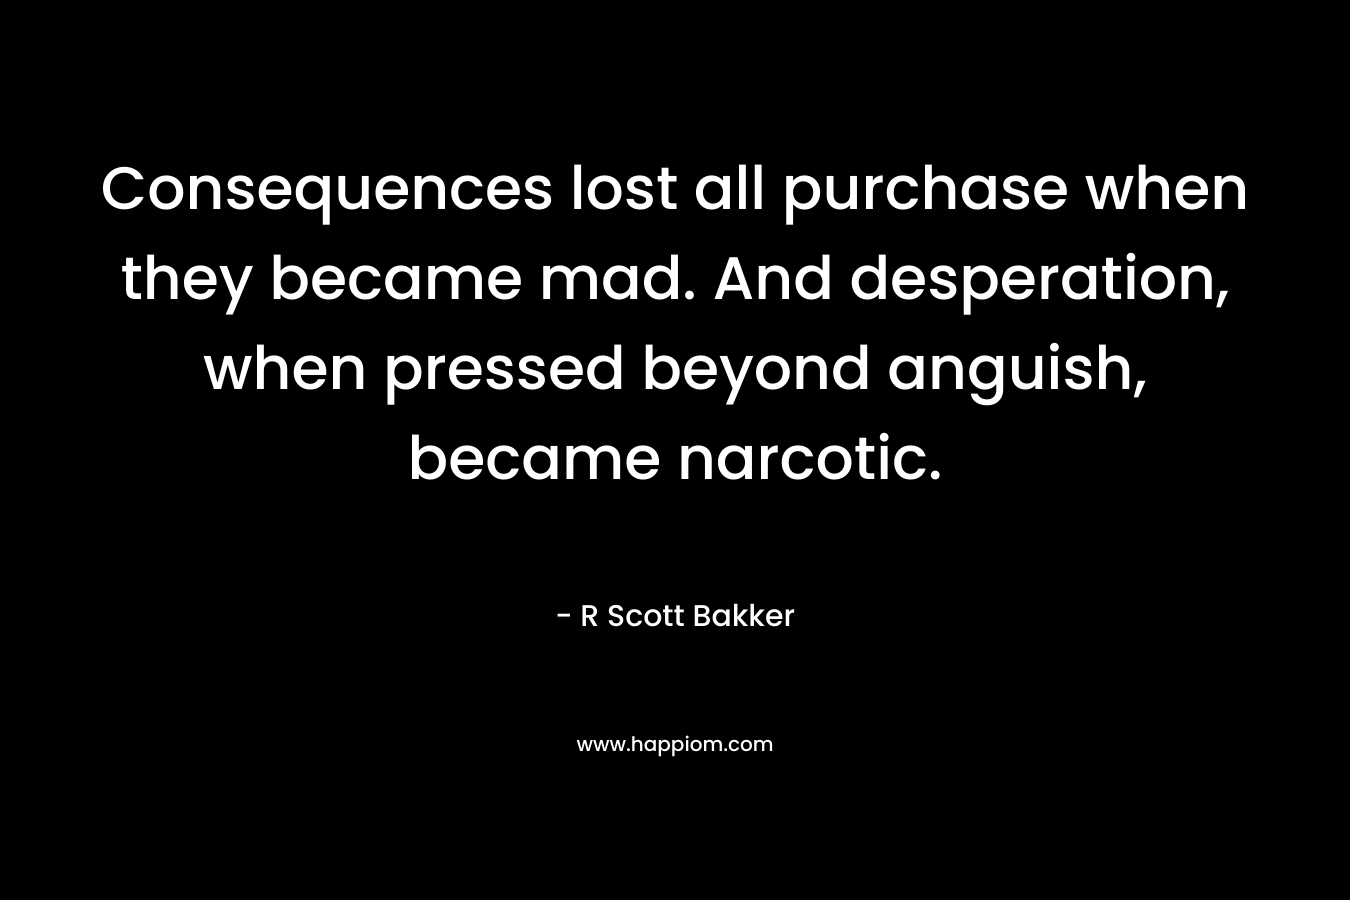 Consequences lost all purchase when they became mad. And desperation, when pressed beyond anguish, became narcotic.